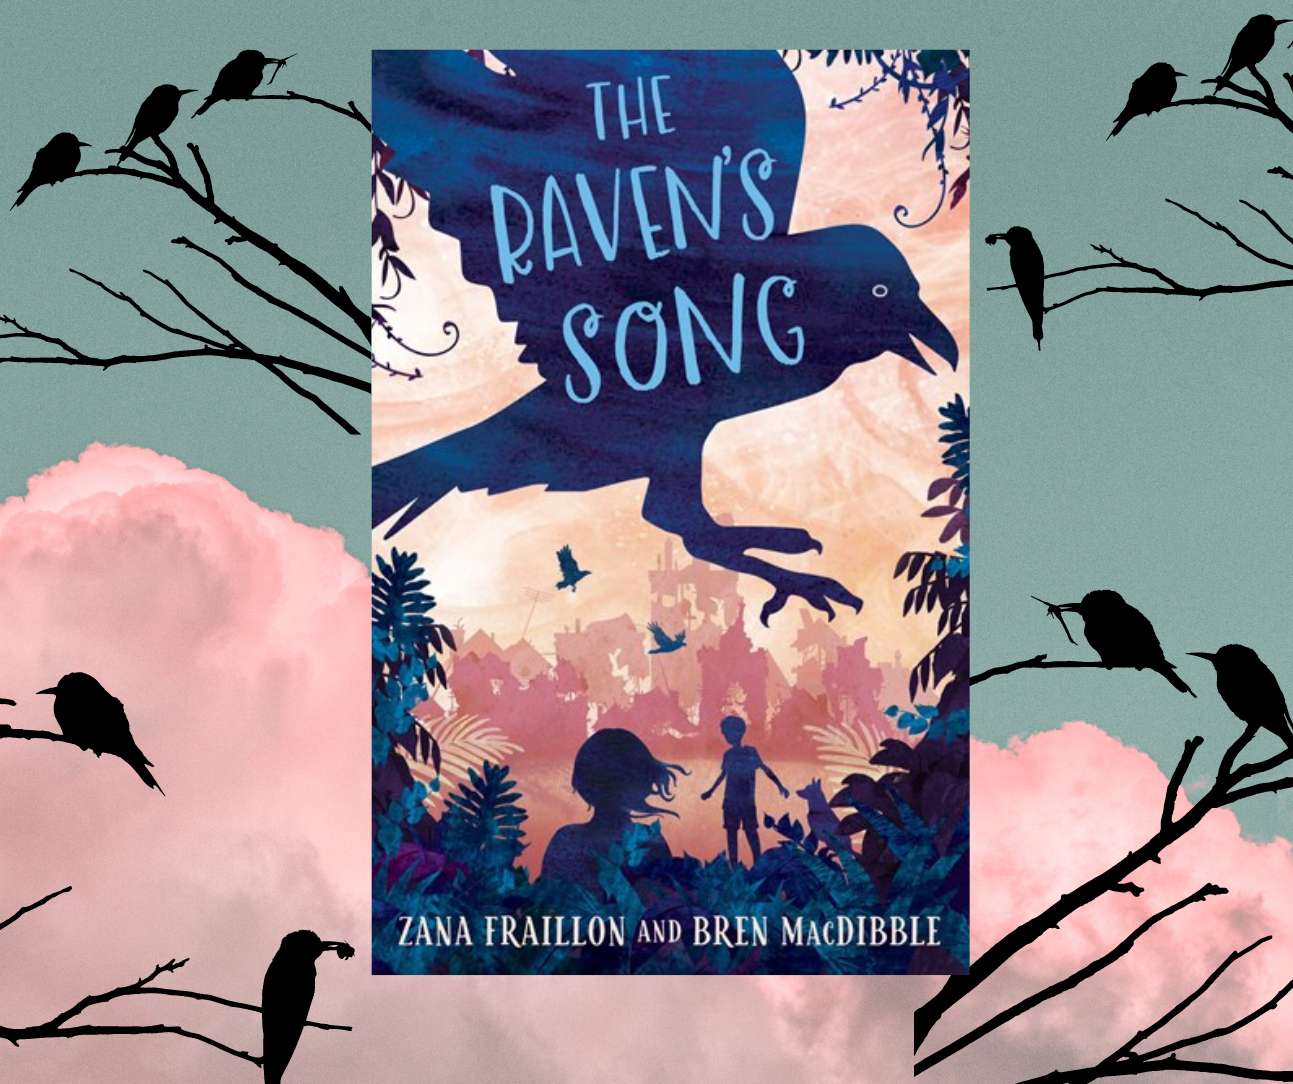 The Raven's Song online puzzle